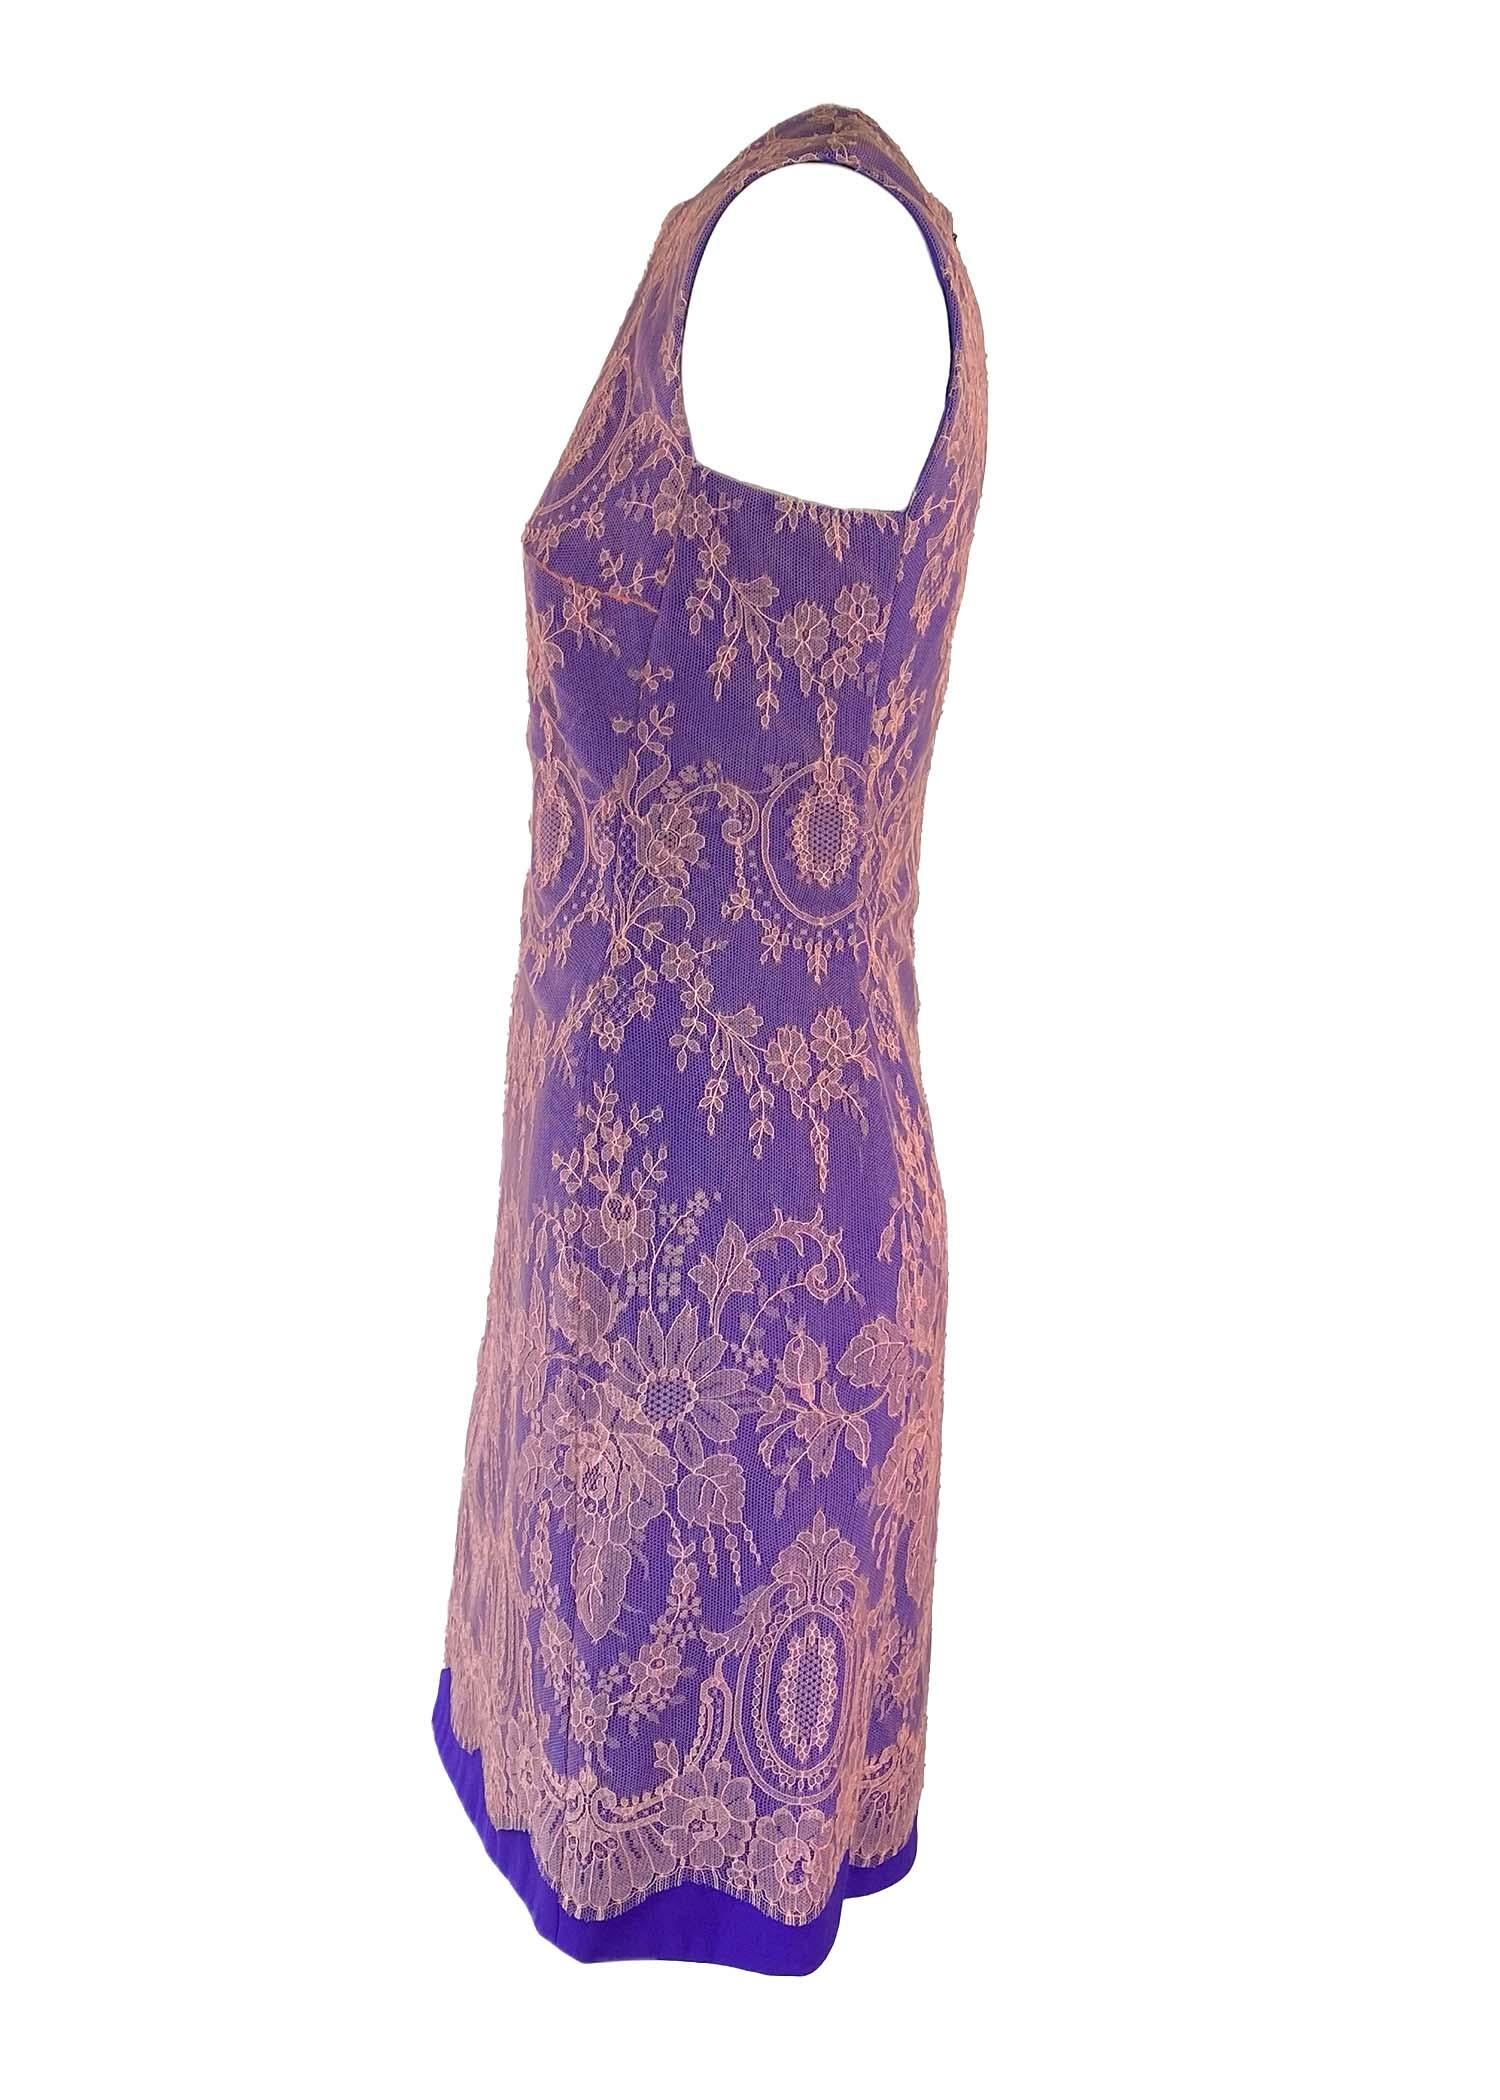 Gray F/W 1996 Gianni Versace Couture Pink Lace Overlay Purple Mini Dress For Sale